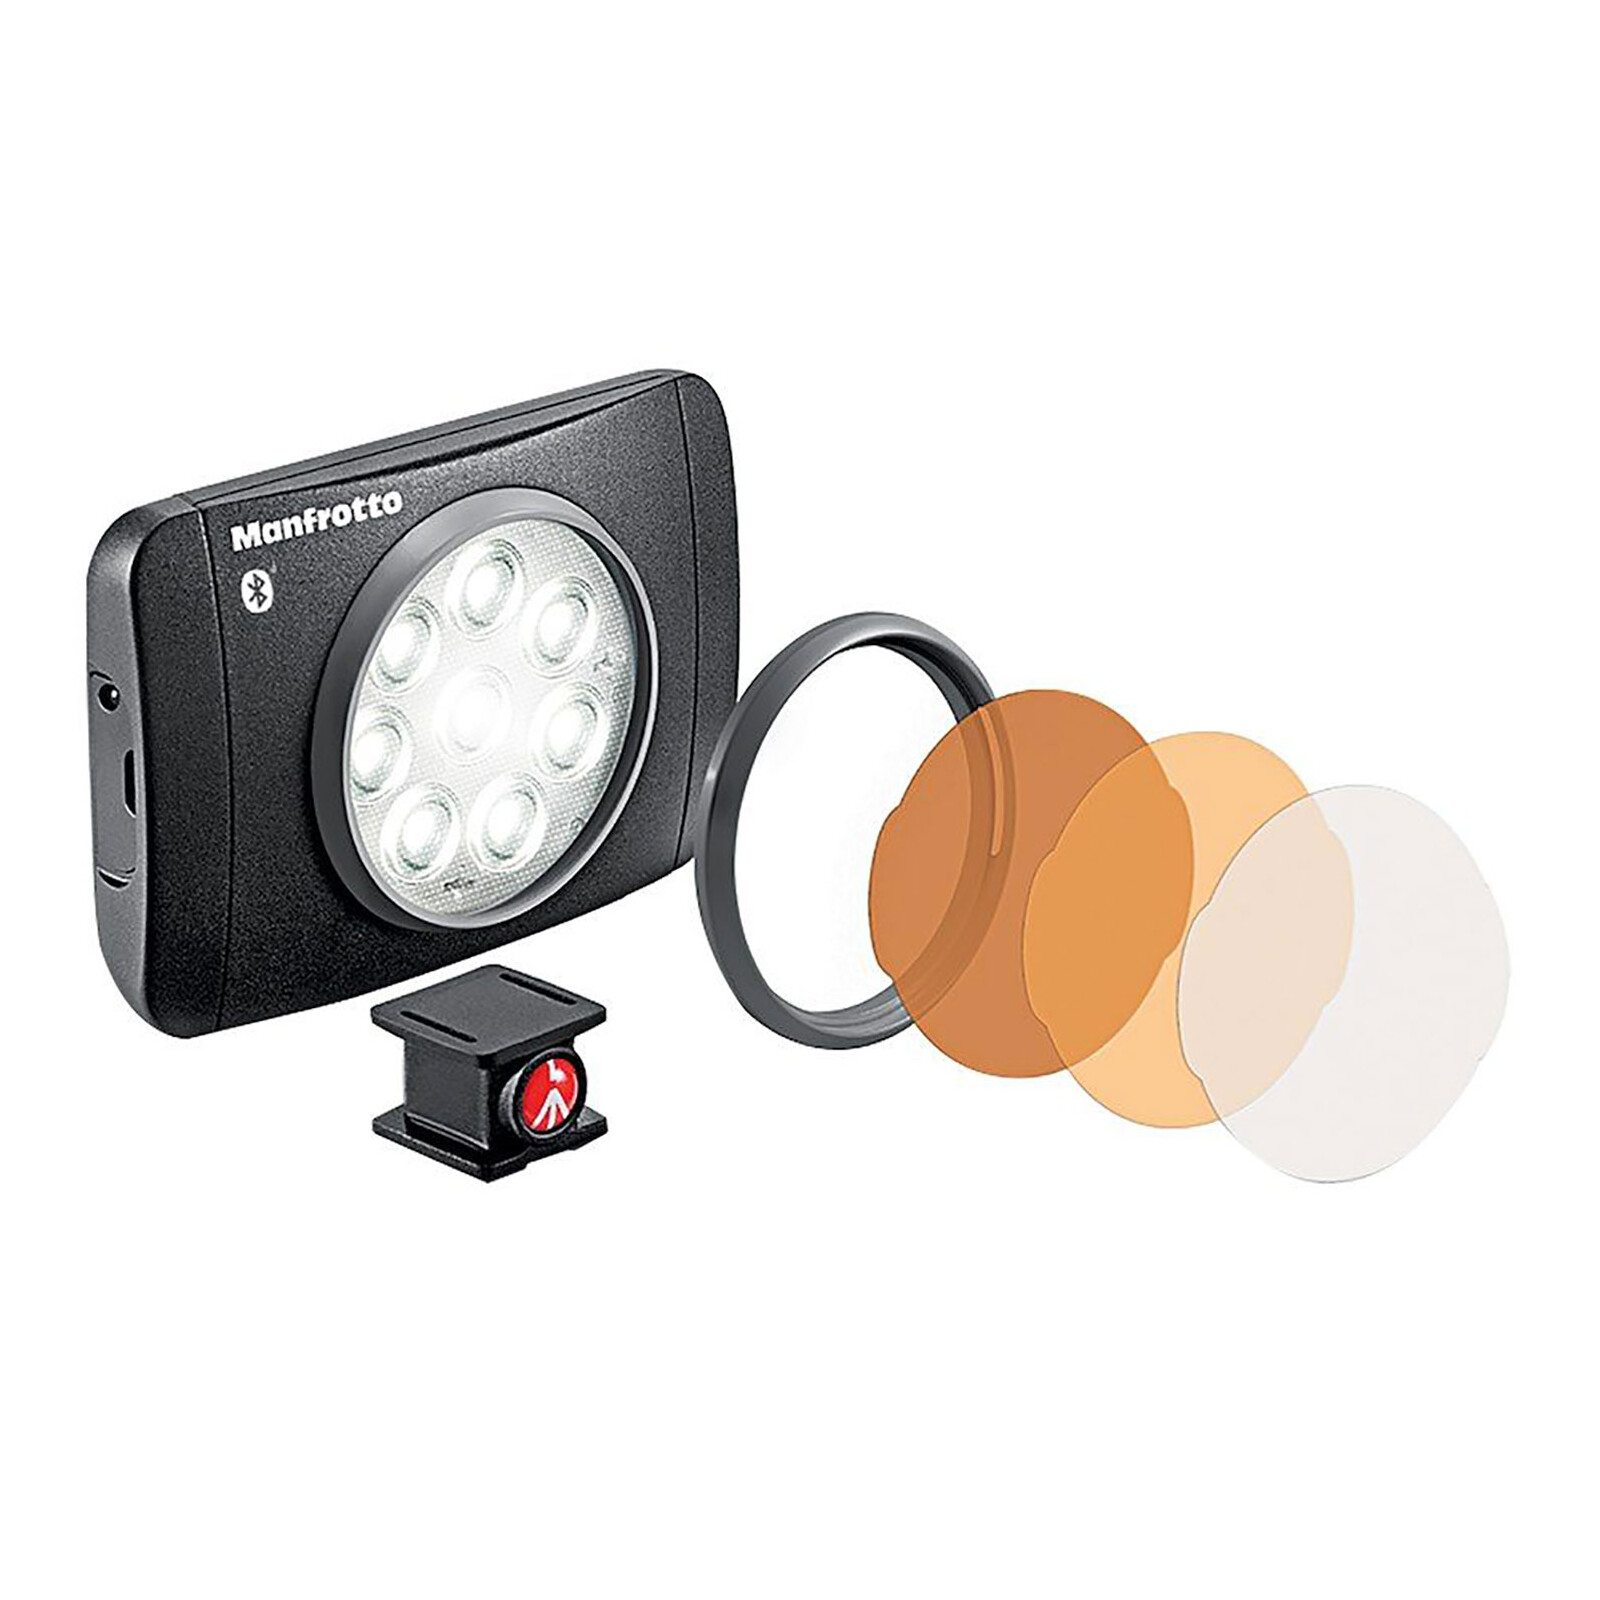 Manfrotto Lumimuse 8A-BT